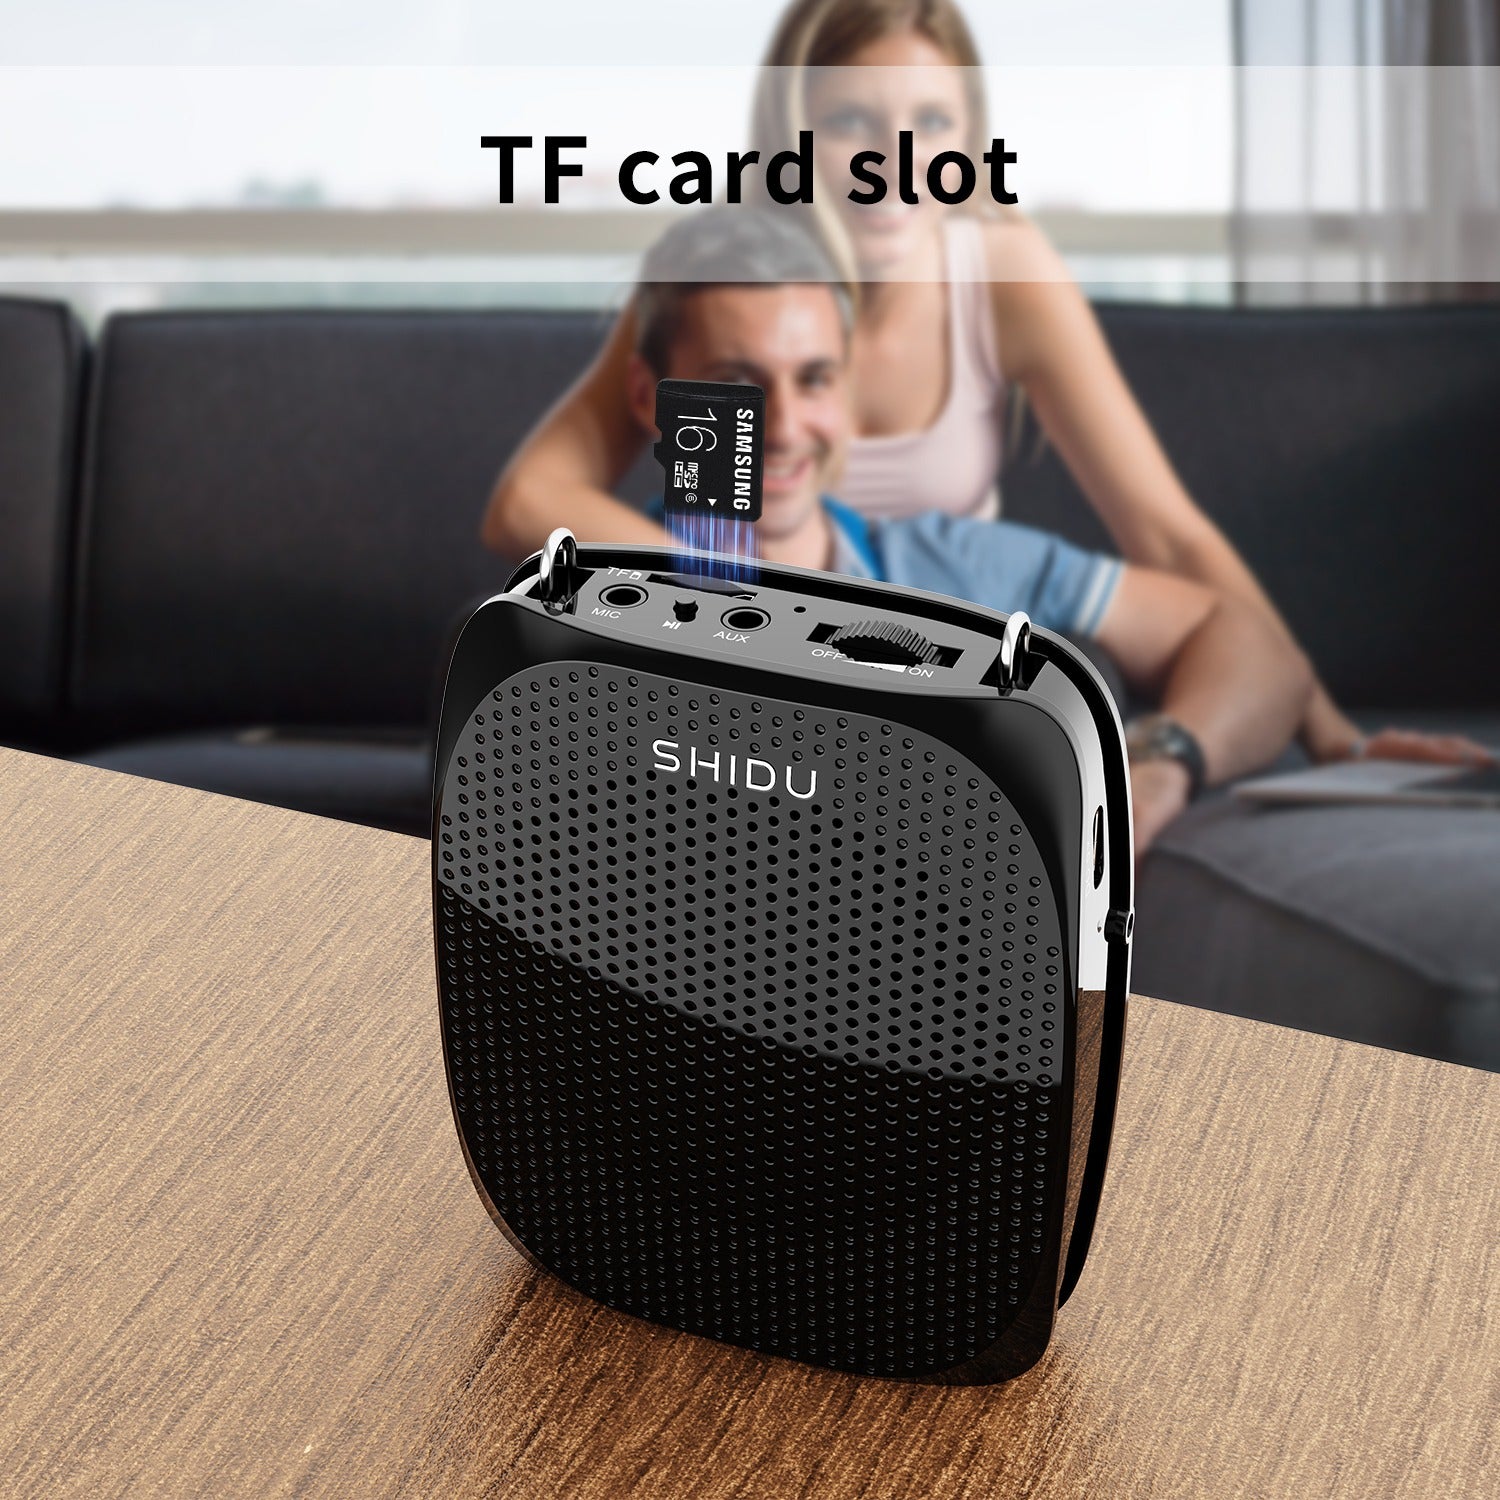 Shidu S515 - Wired Portable Voice Amplifier with Bluetooth Support (Black)